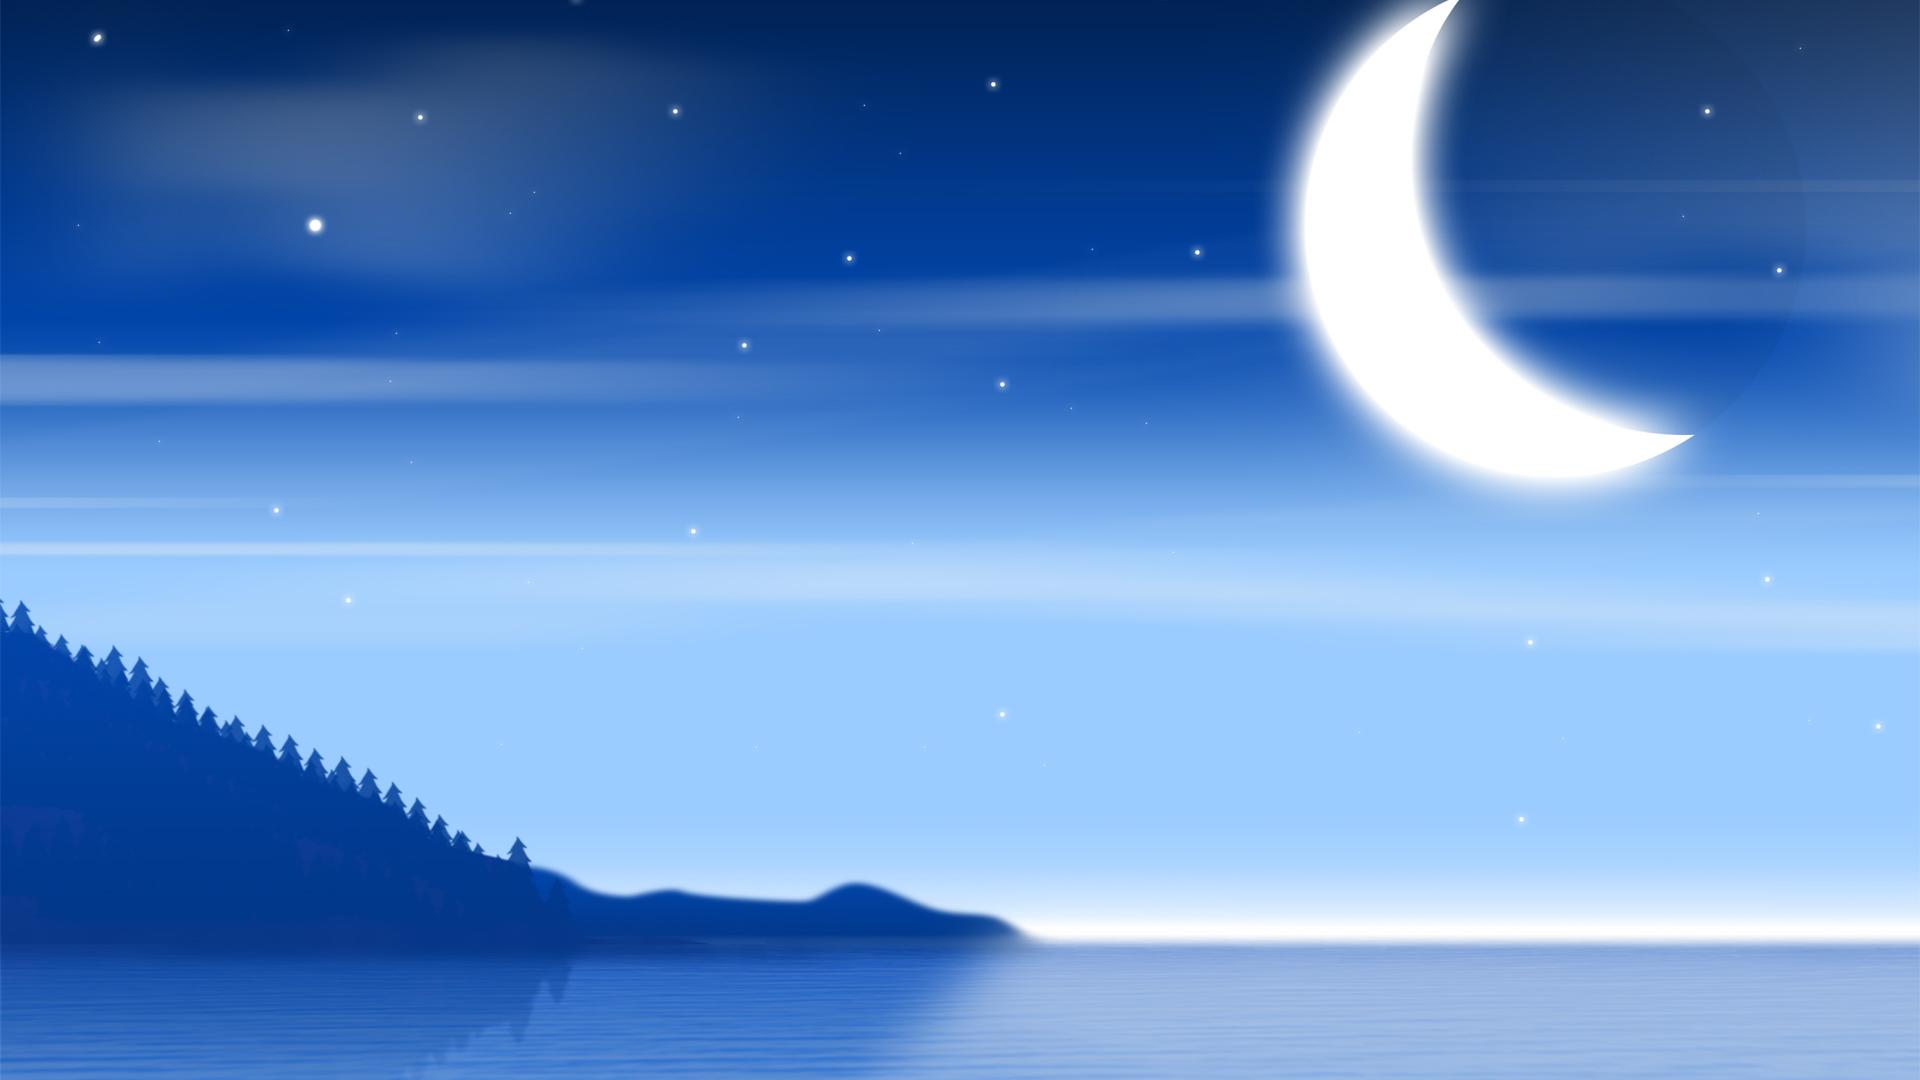 Blue Night Sky And Sea Desktop Backgrounds Widescreen and HD